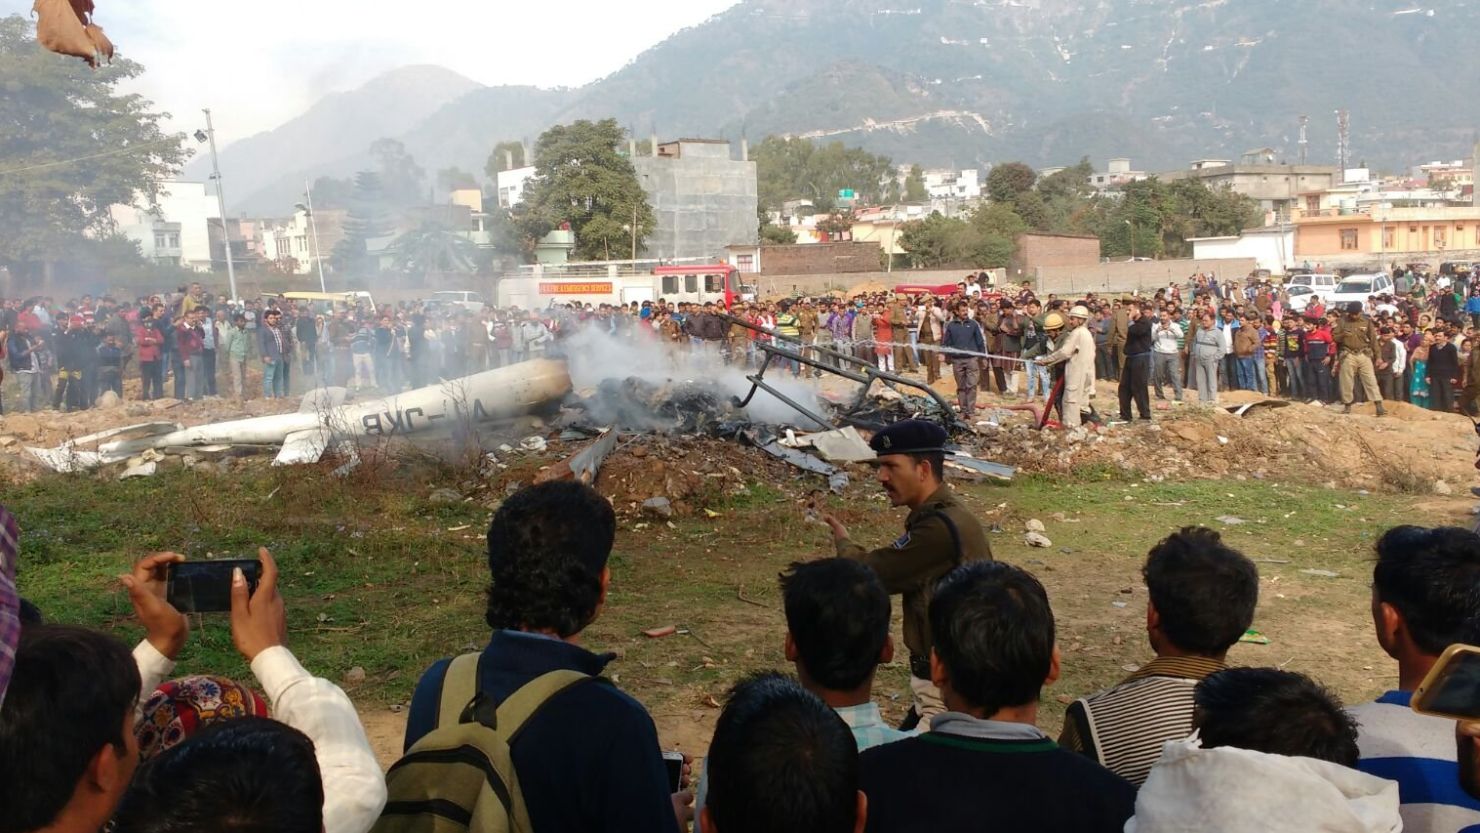 A crowd gathered at the scene of the deadly helicopter crash in Katra, Kashmir, on Monday. 